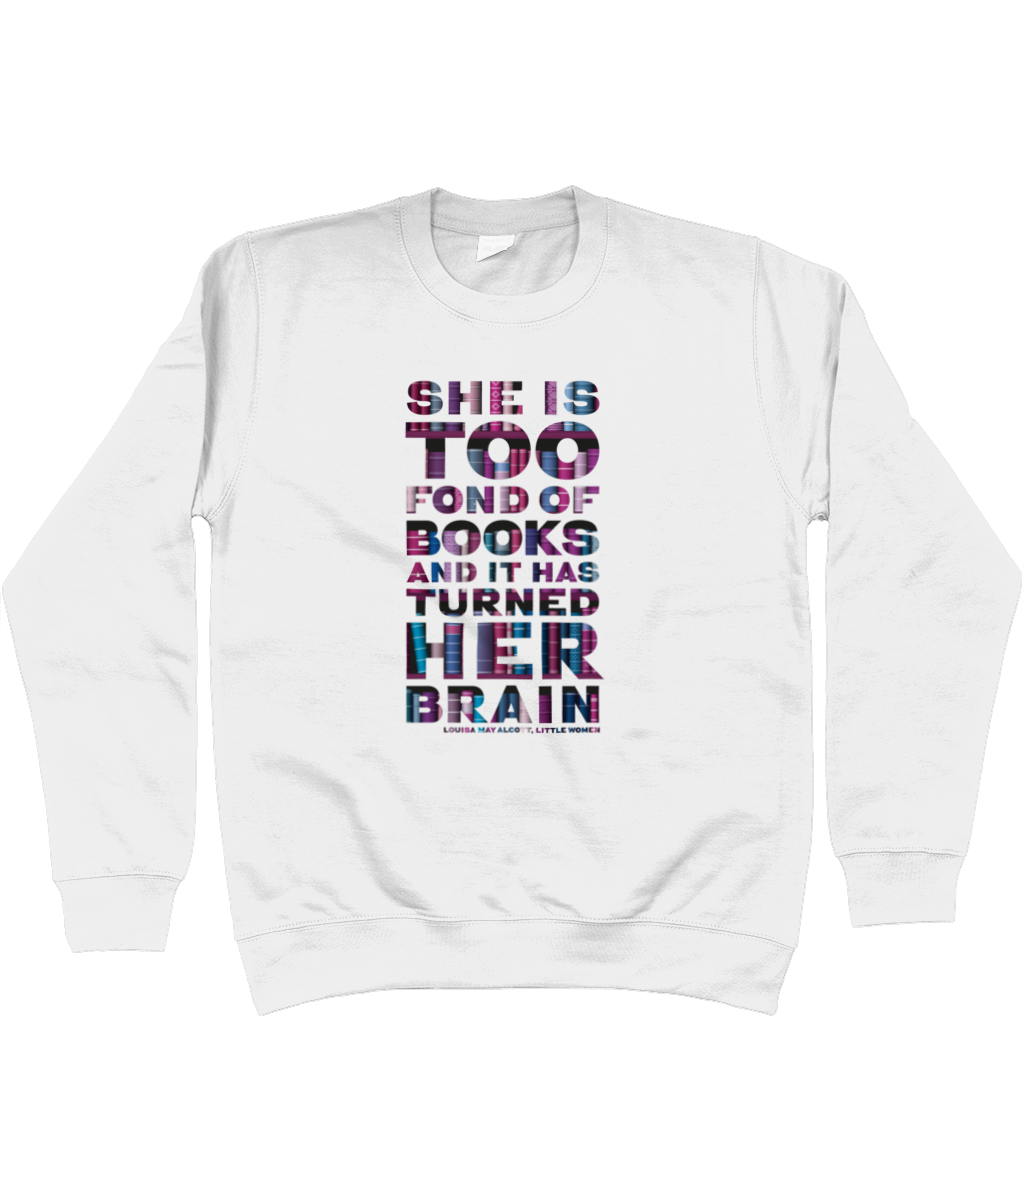 Unisex sweat shirt "She is too fond of Books it has turned her brain" Book lover gift, librarian gift, bookworm, book nerd